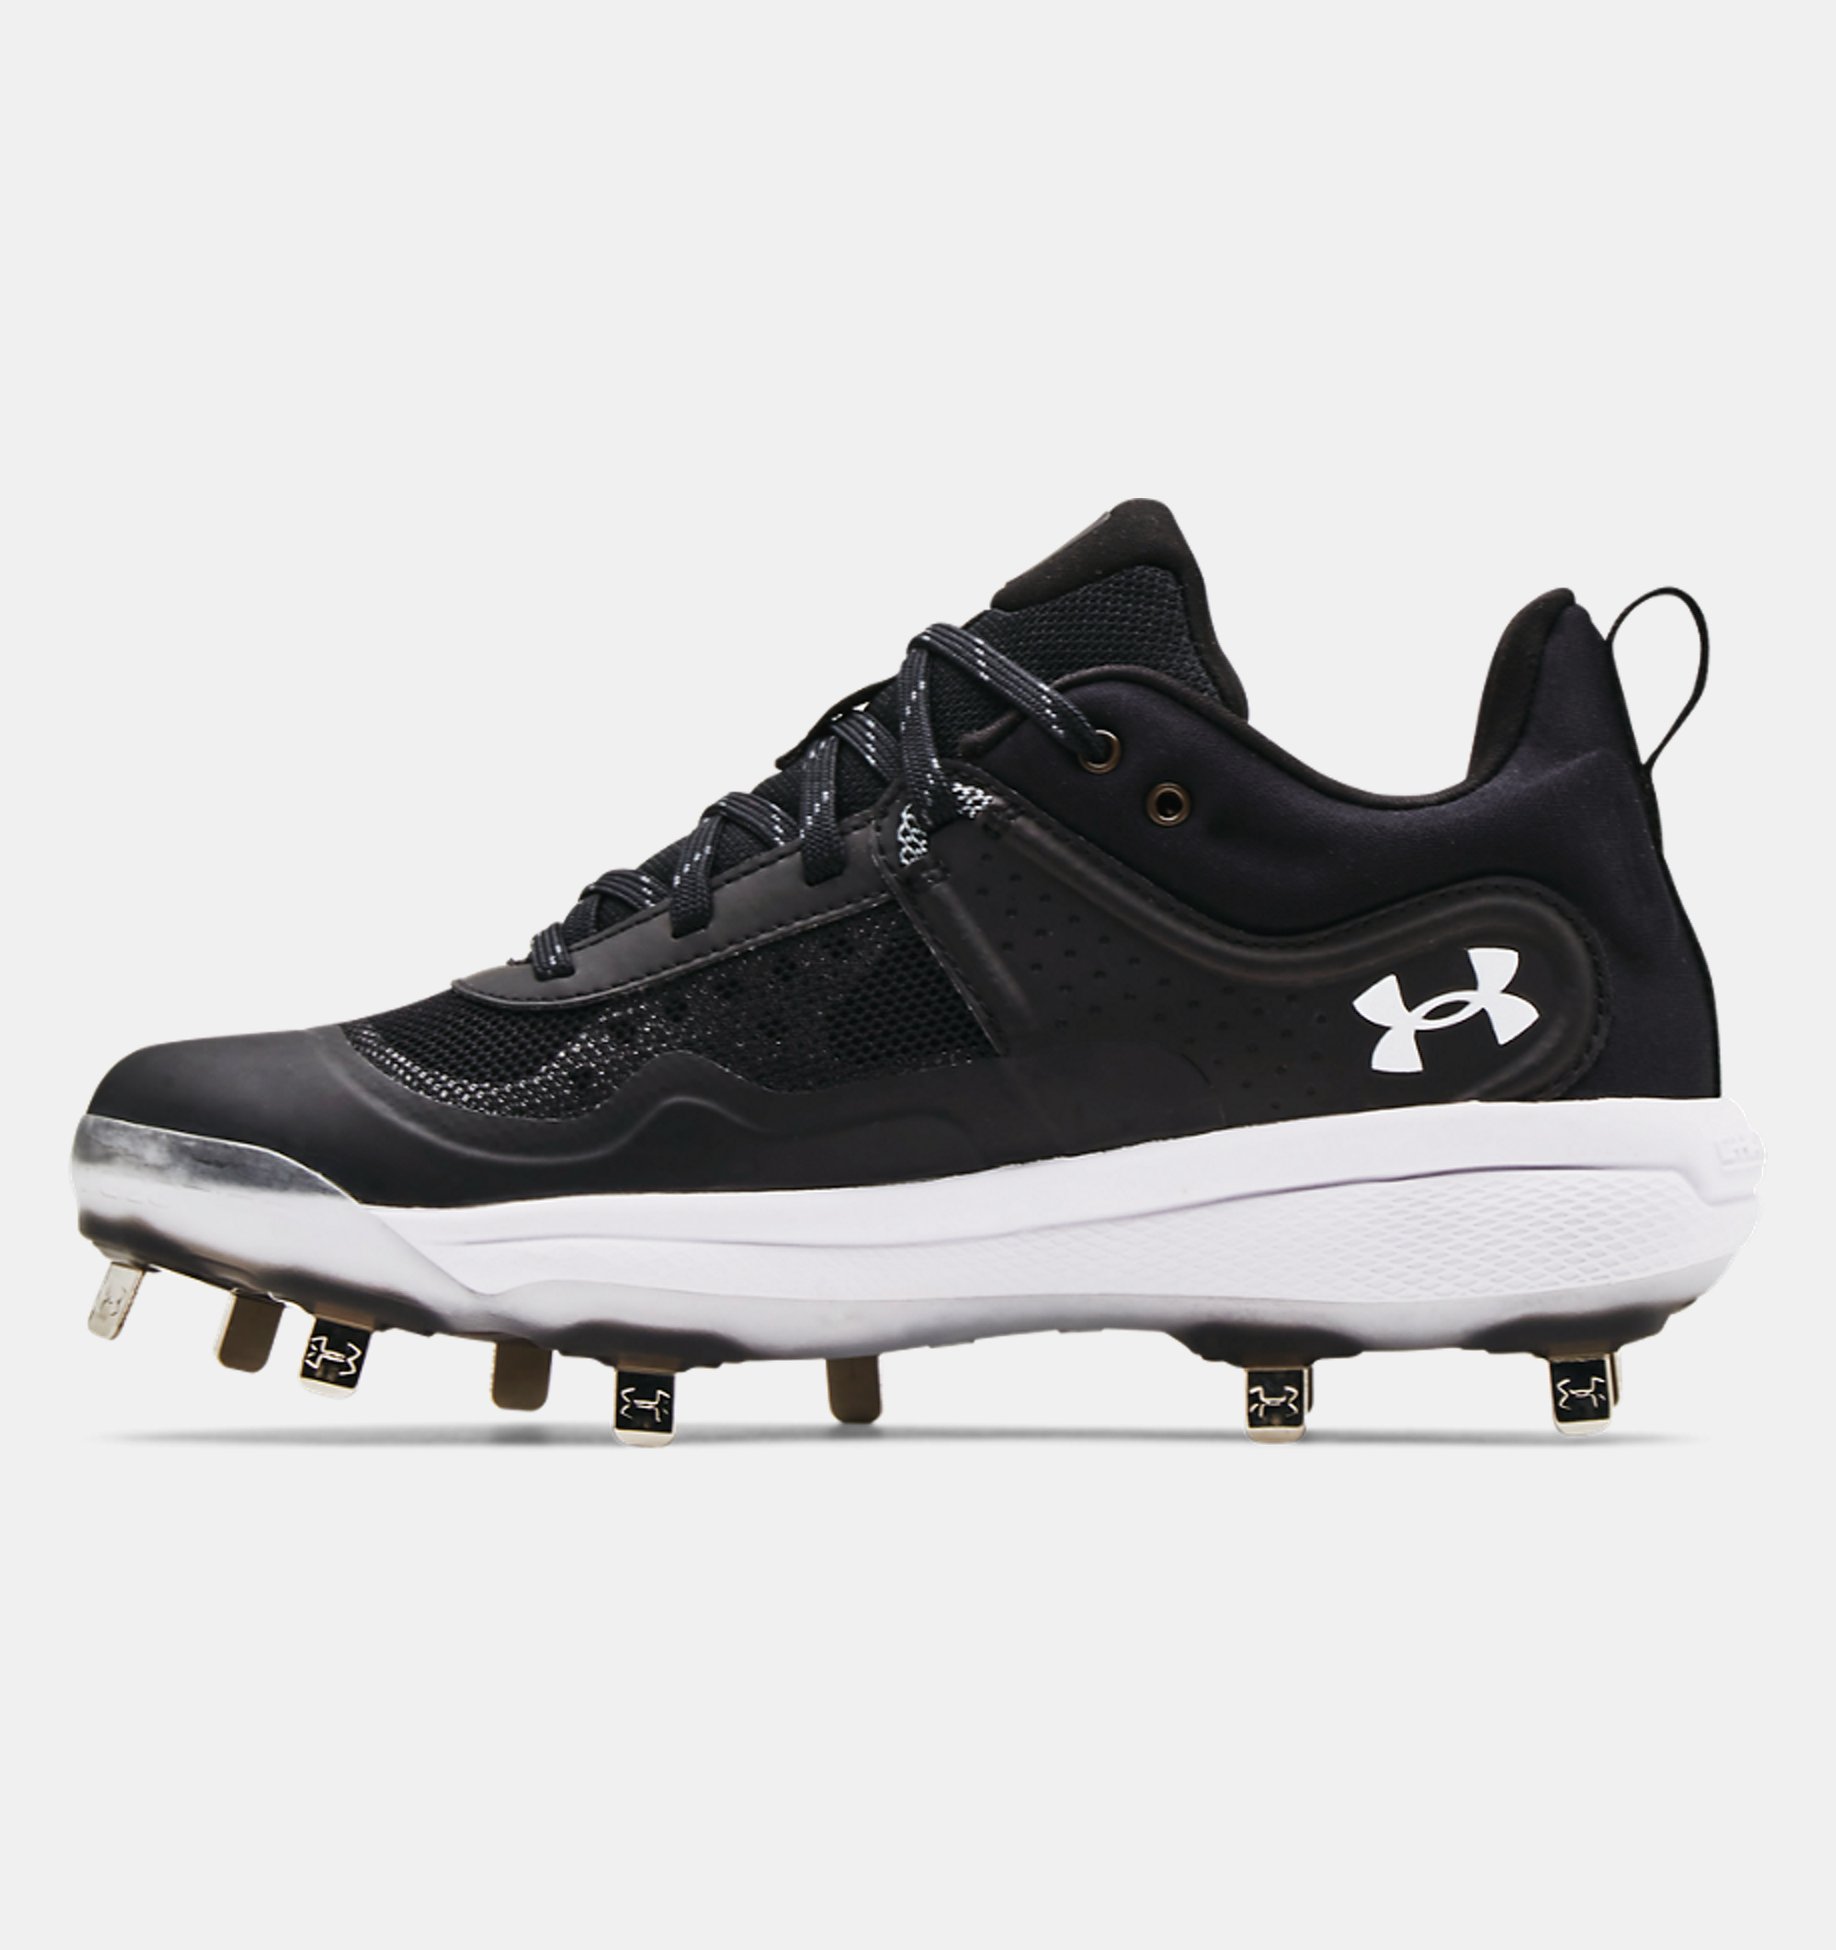 New Under Armour Women's Size 7 Spine Glyde ST Softball Cleat 1264179 Shoe 